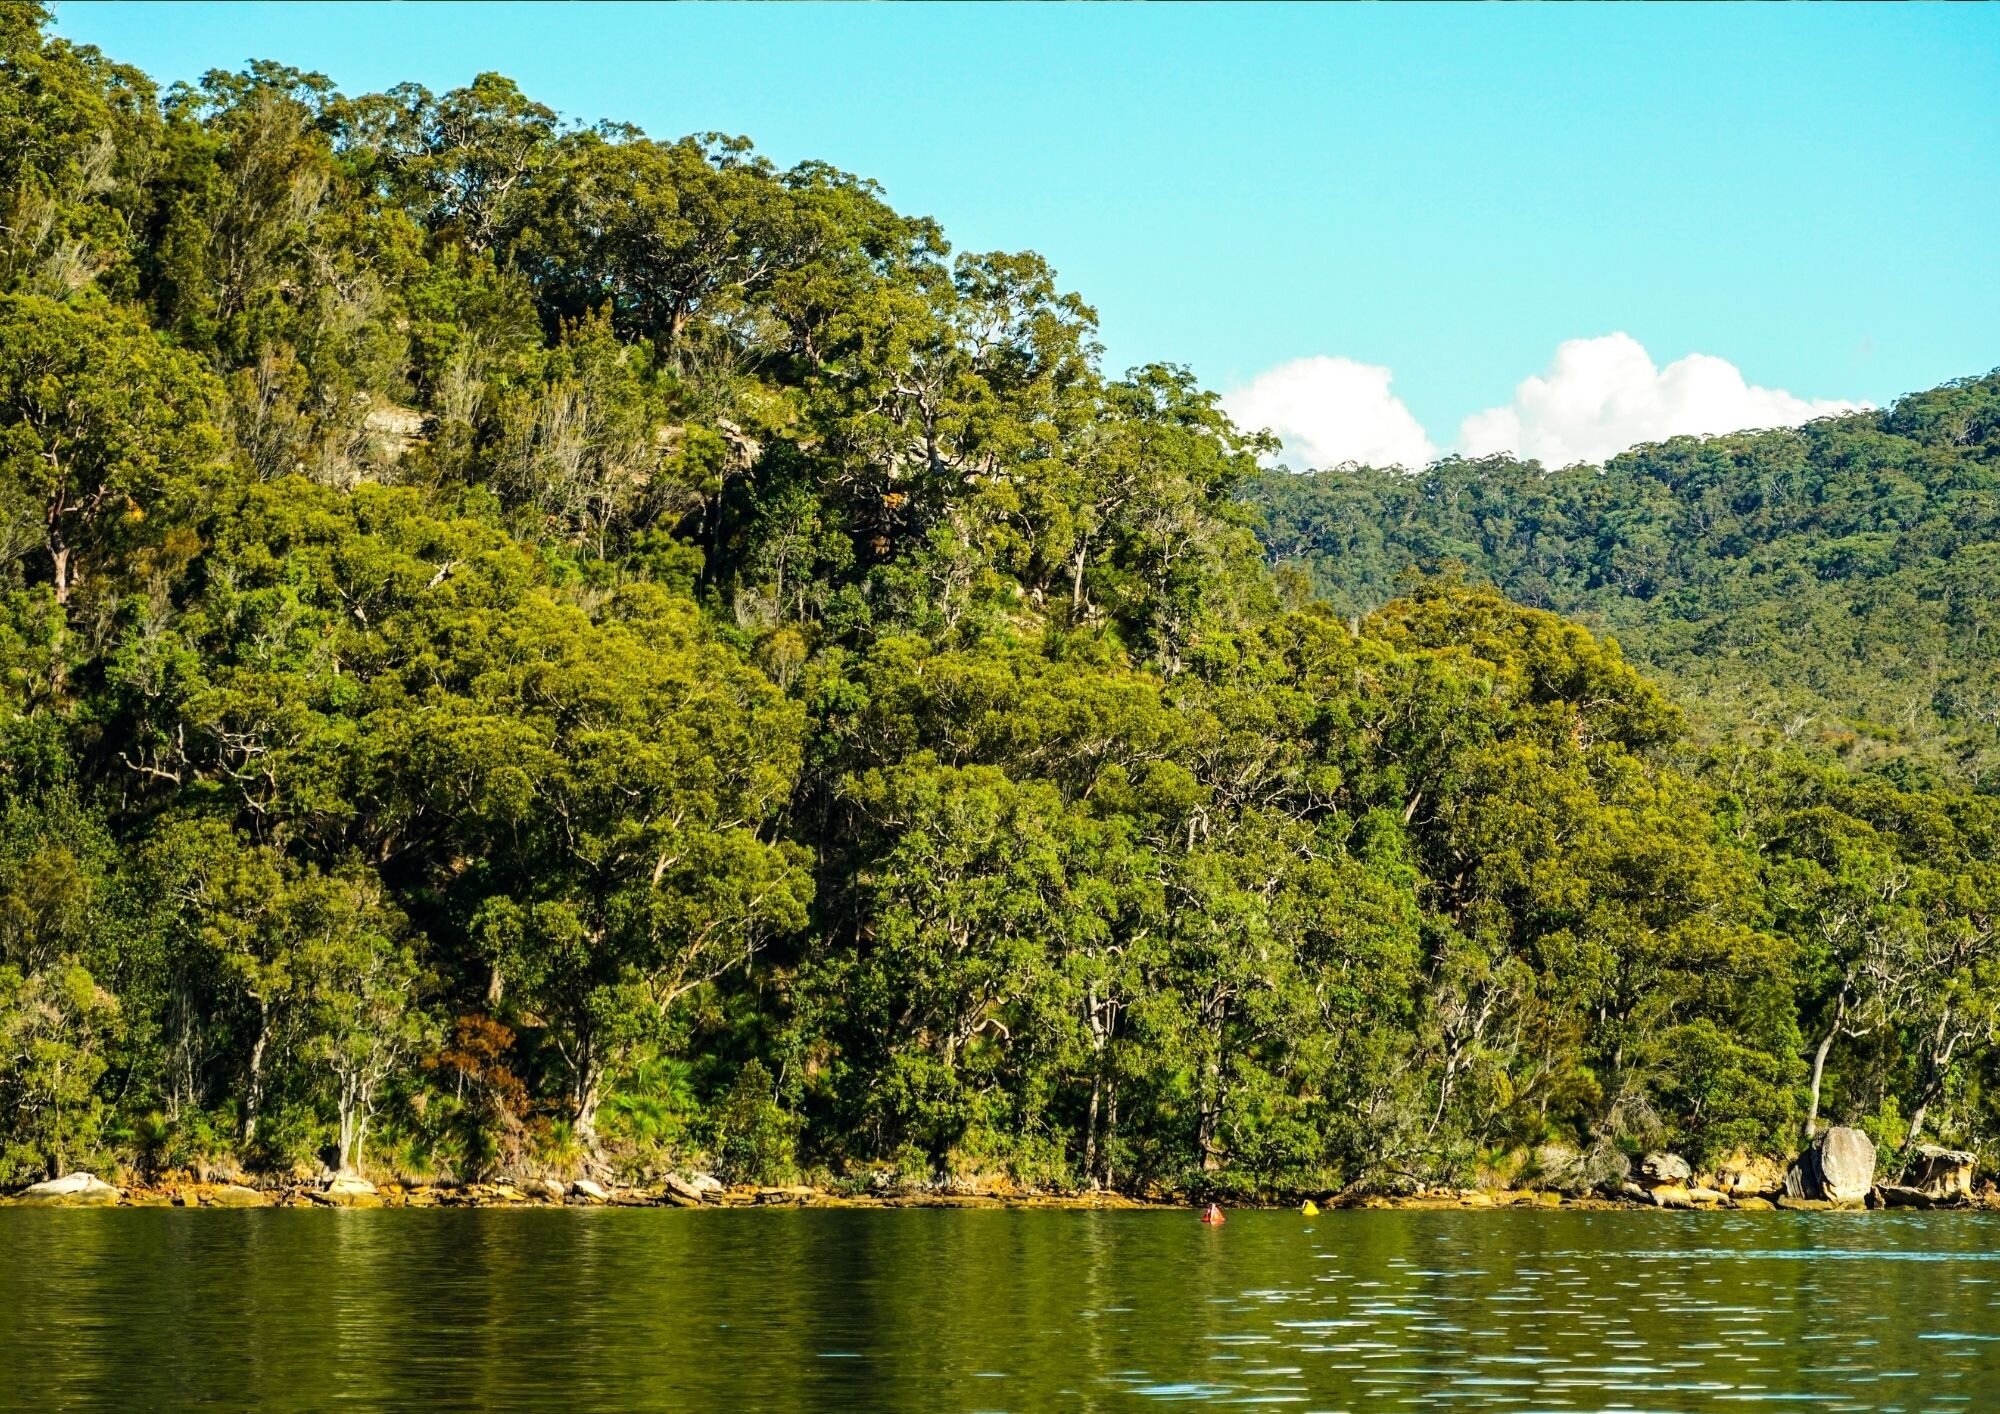   Six councils working together to deliver    Hawkesbury Nepean River System     Coastal Management Program    Explore CMP  